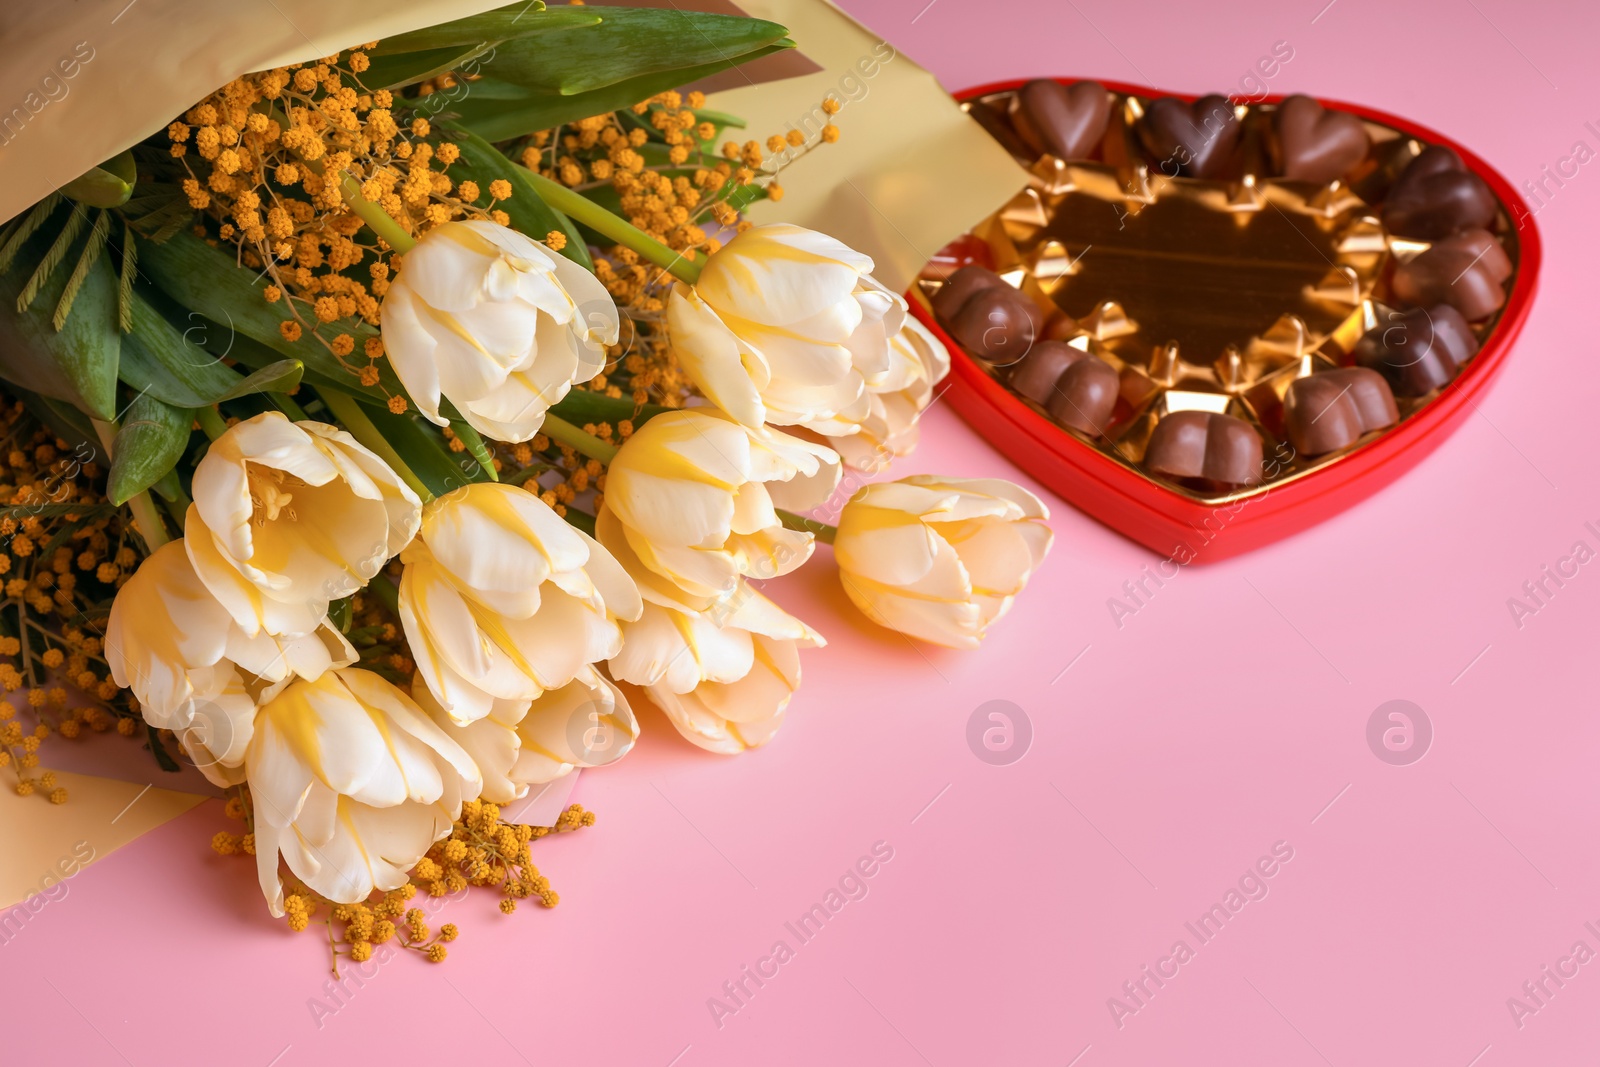 Photo of Bouquet with beautiful tulips, mimosa flowers and box of chocolate candies in shape of heart on pink background